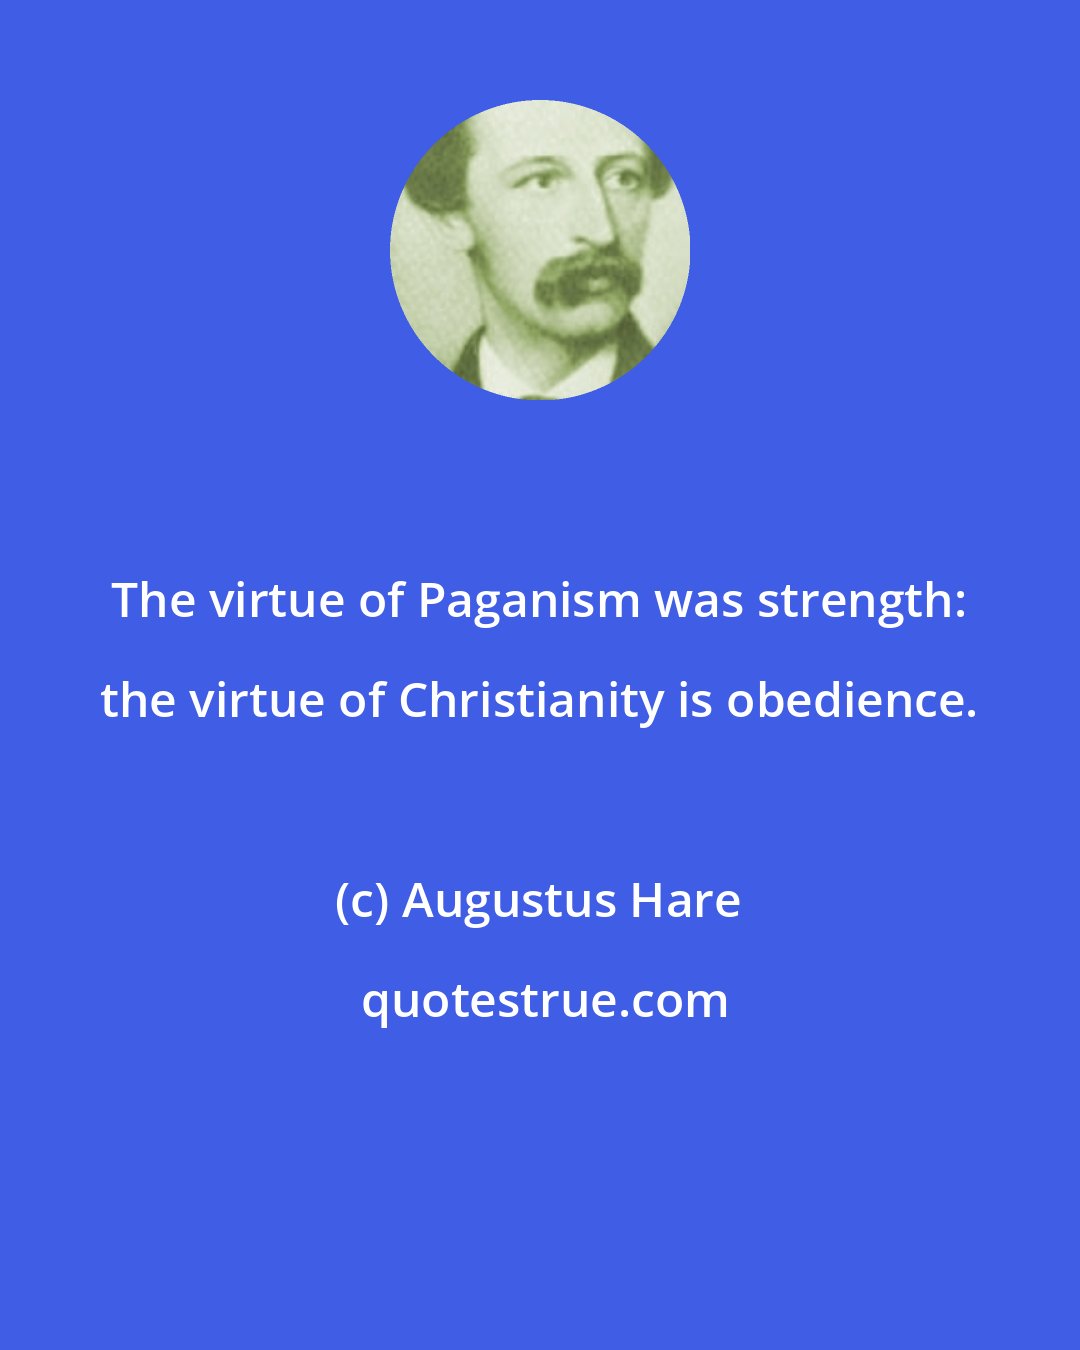 Augustus Hare: The virtue of Paganism was strength: the virtue of Christianity is obedience.